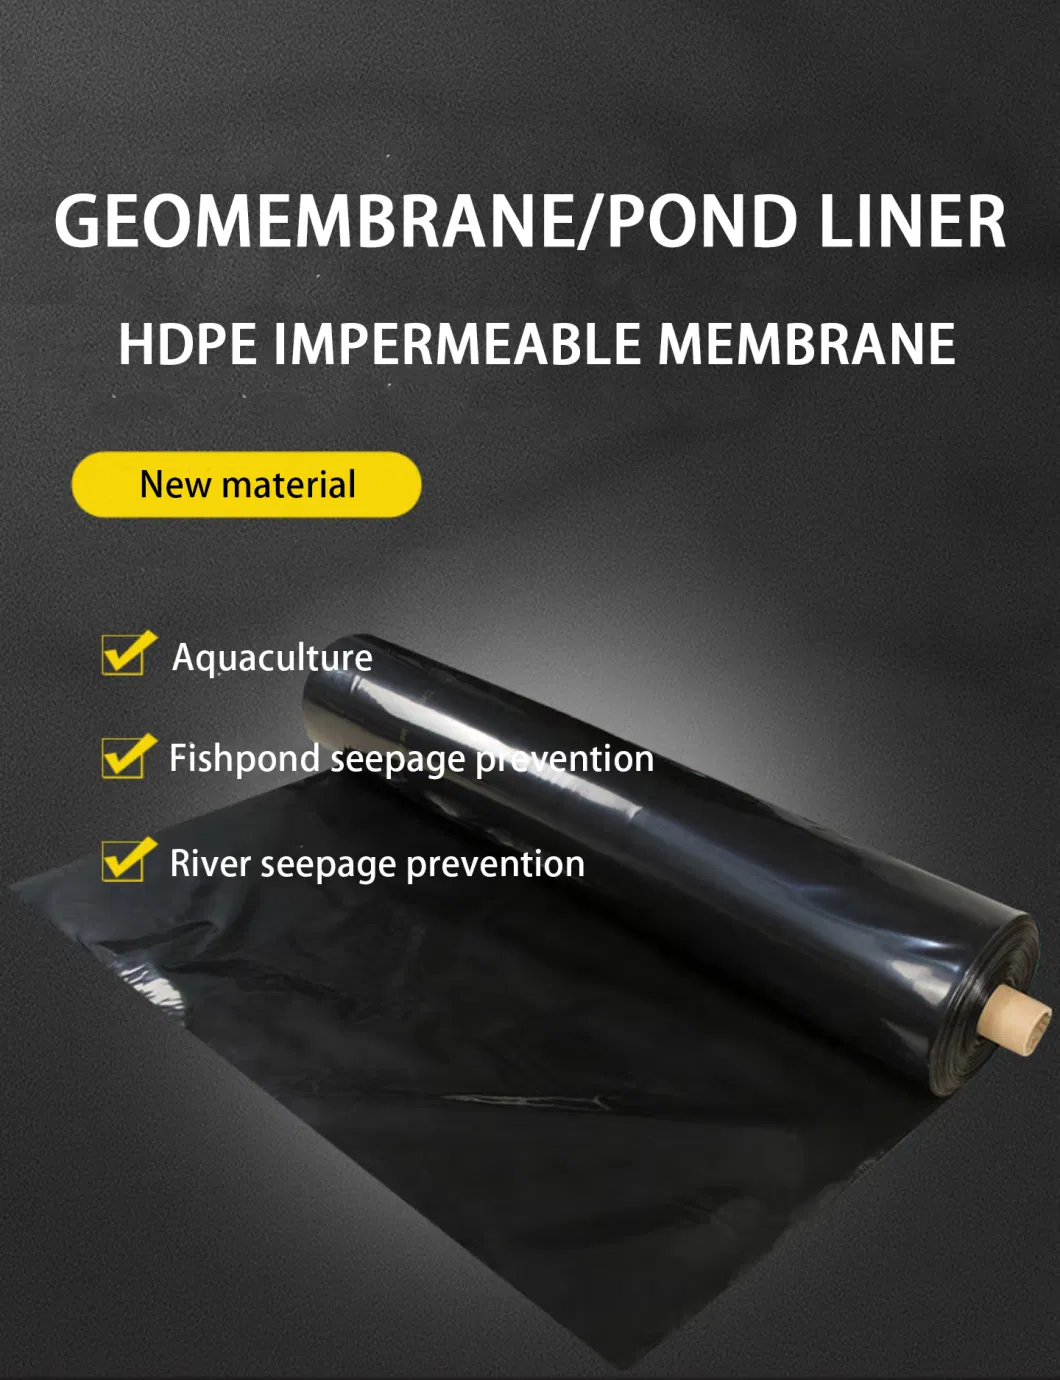 Geomembrane High Quality HDPE Geomembrane Applications Pond Lining Fish Farms Swimming Pools Global Hot Sell